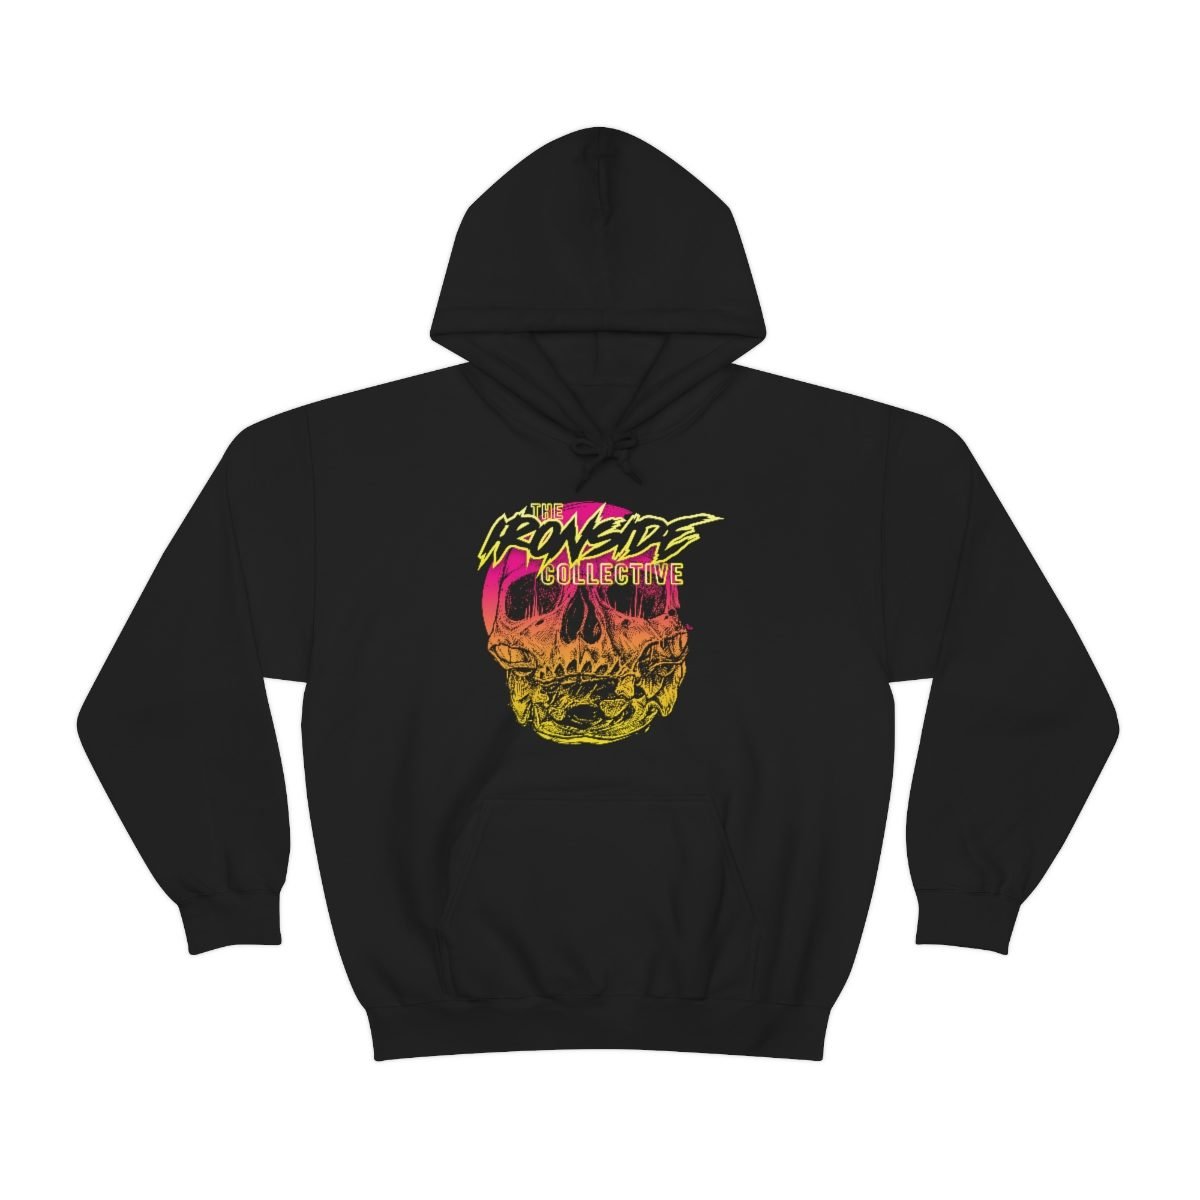 The Ironside Collective (The Charon Collective) Pullover Hooded Sweatshirt 18500